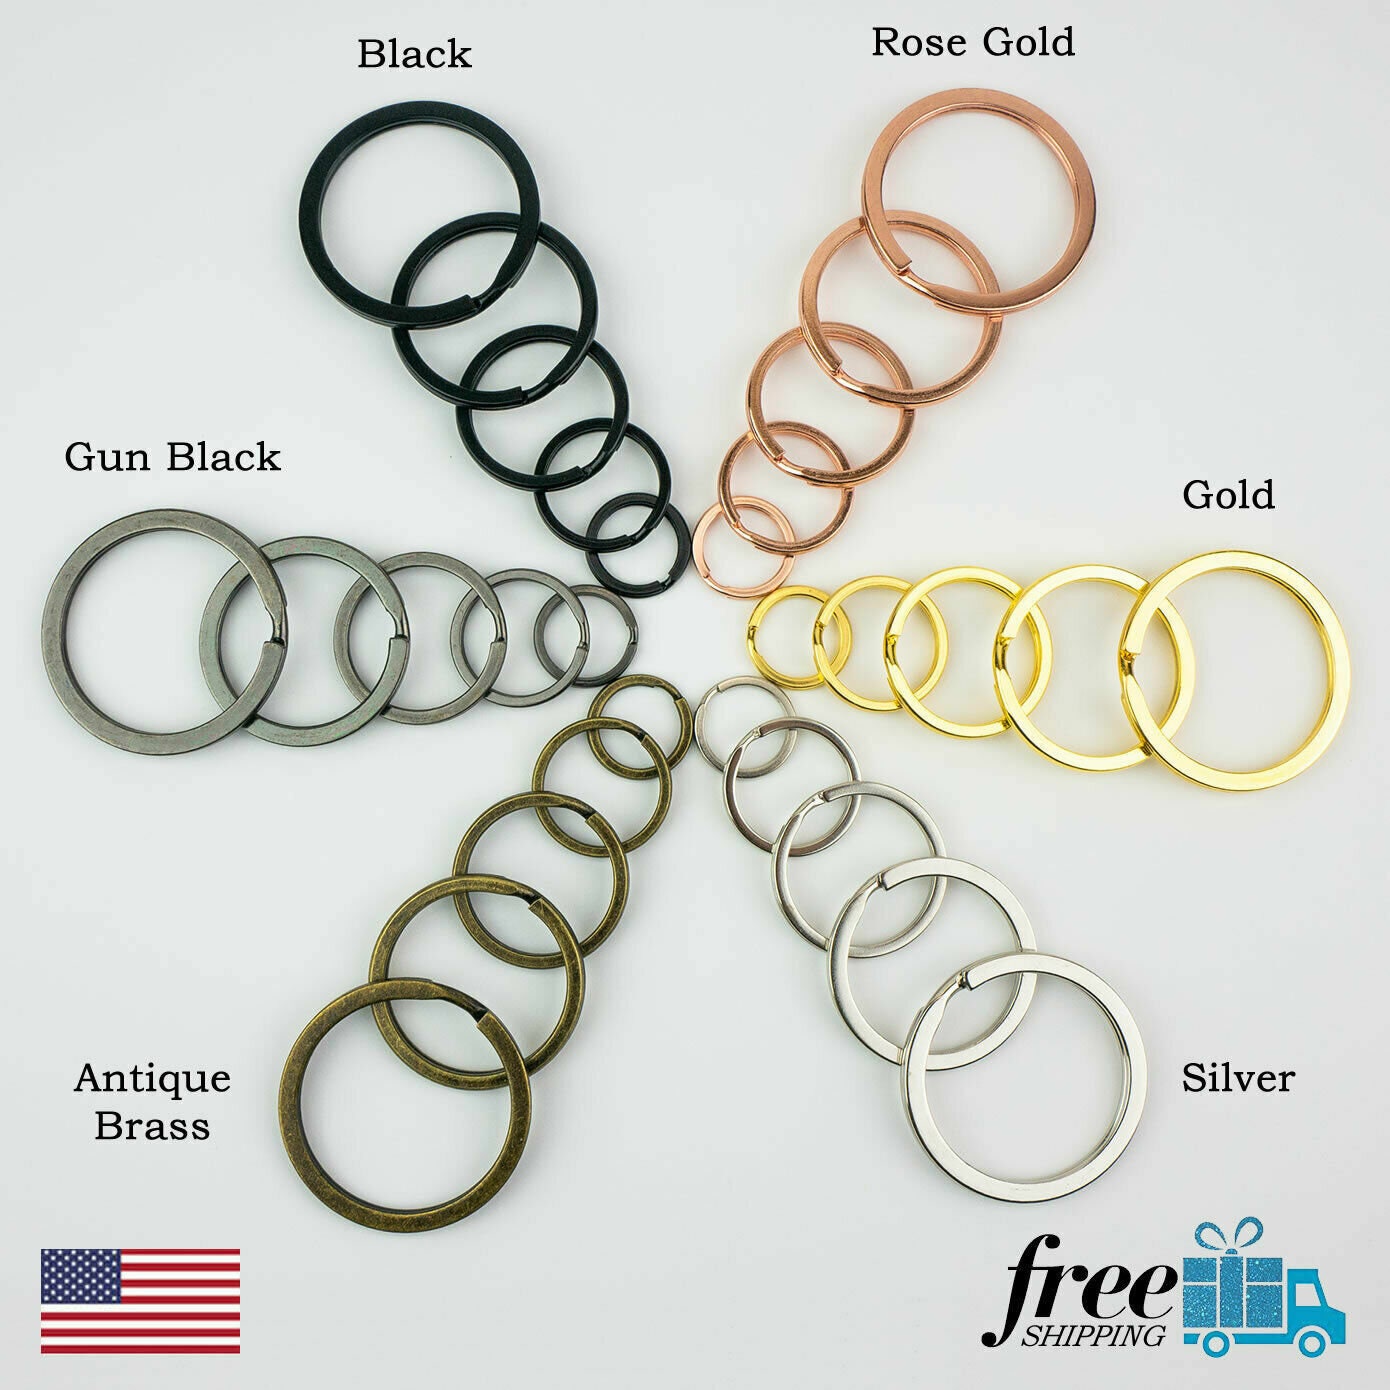 Small Key Chain Ring 50 PCS Metal Split Rings 20mm Stainless Steel Flat  Rings with Excellent Spring Retention for Keys Organization/Jewlery Making